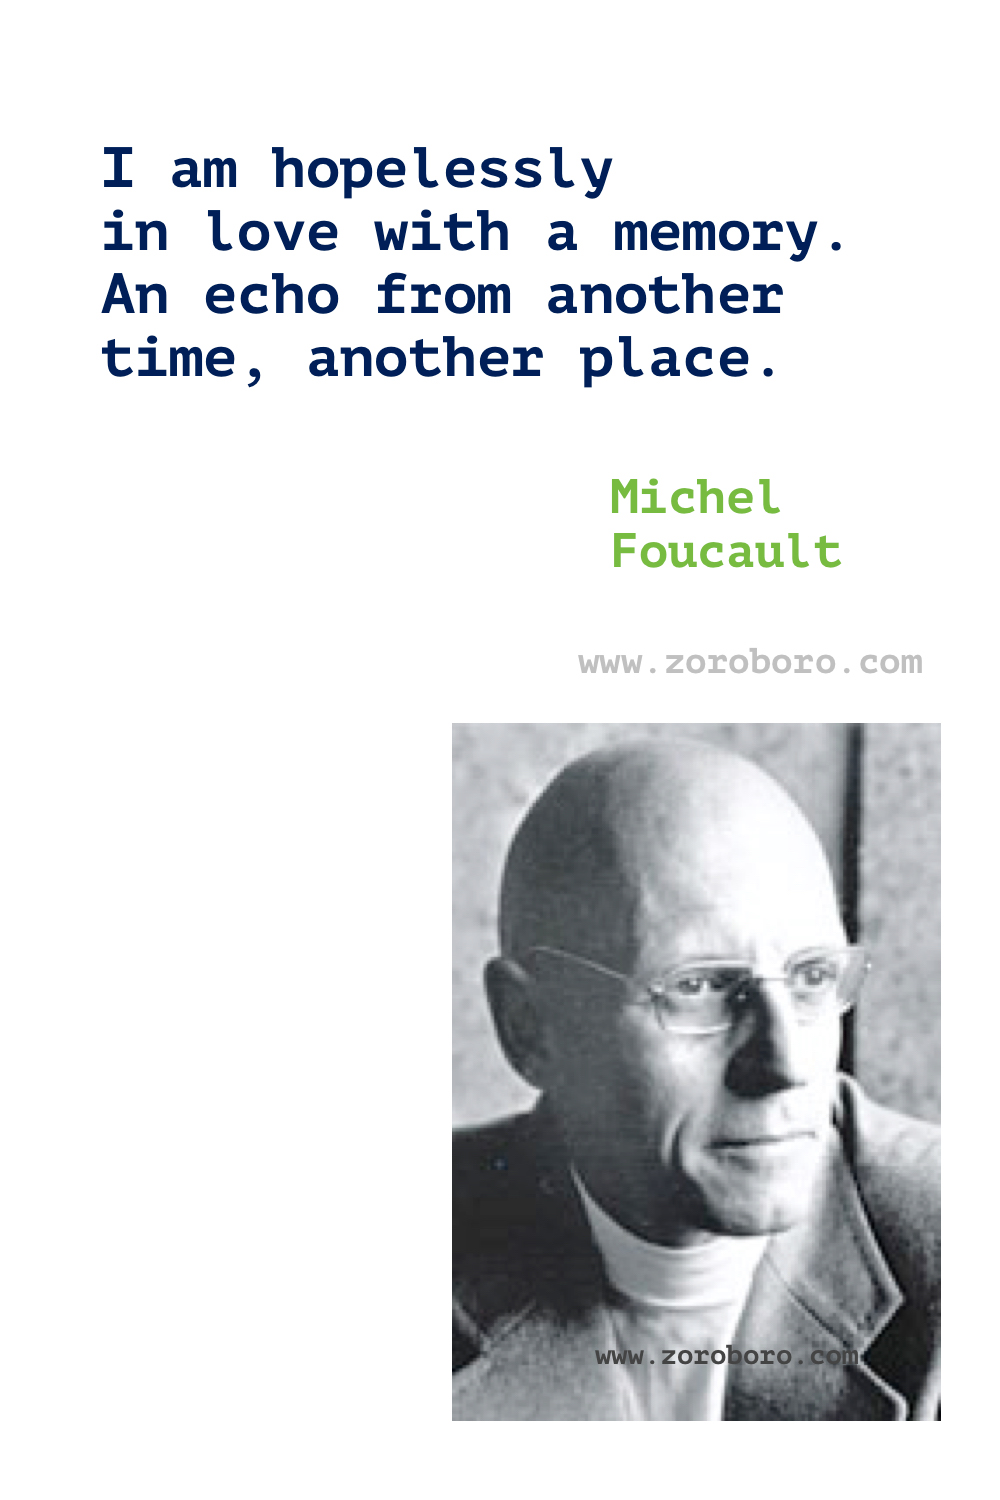 Michel Foucault Quotes. Michel Foucault Quotes. Michel Foucault Books Quotes. Michel Foucault Power, Politics Quotes. Michel Foucault Philosophy, Michel Foucault Discipline and Punish, Madness and Civilization & The History of Sexuality